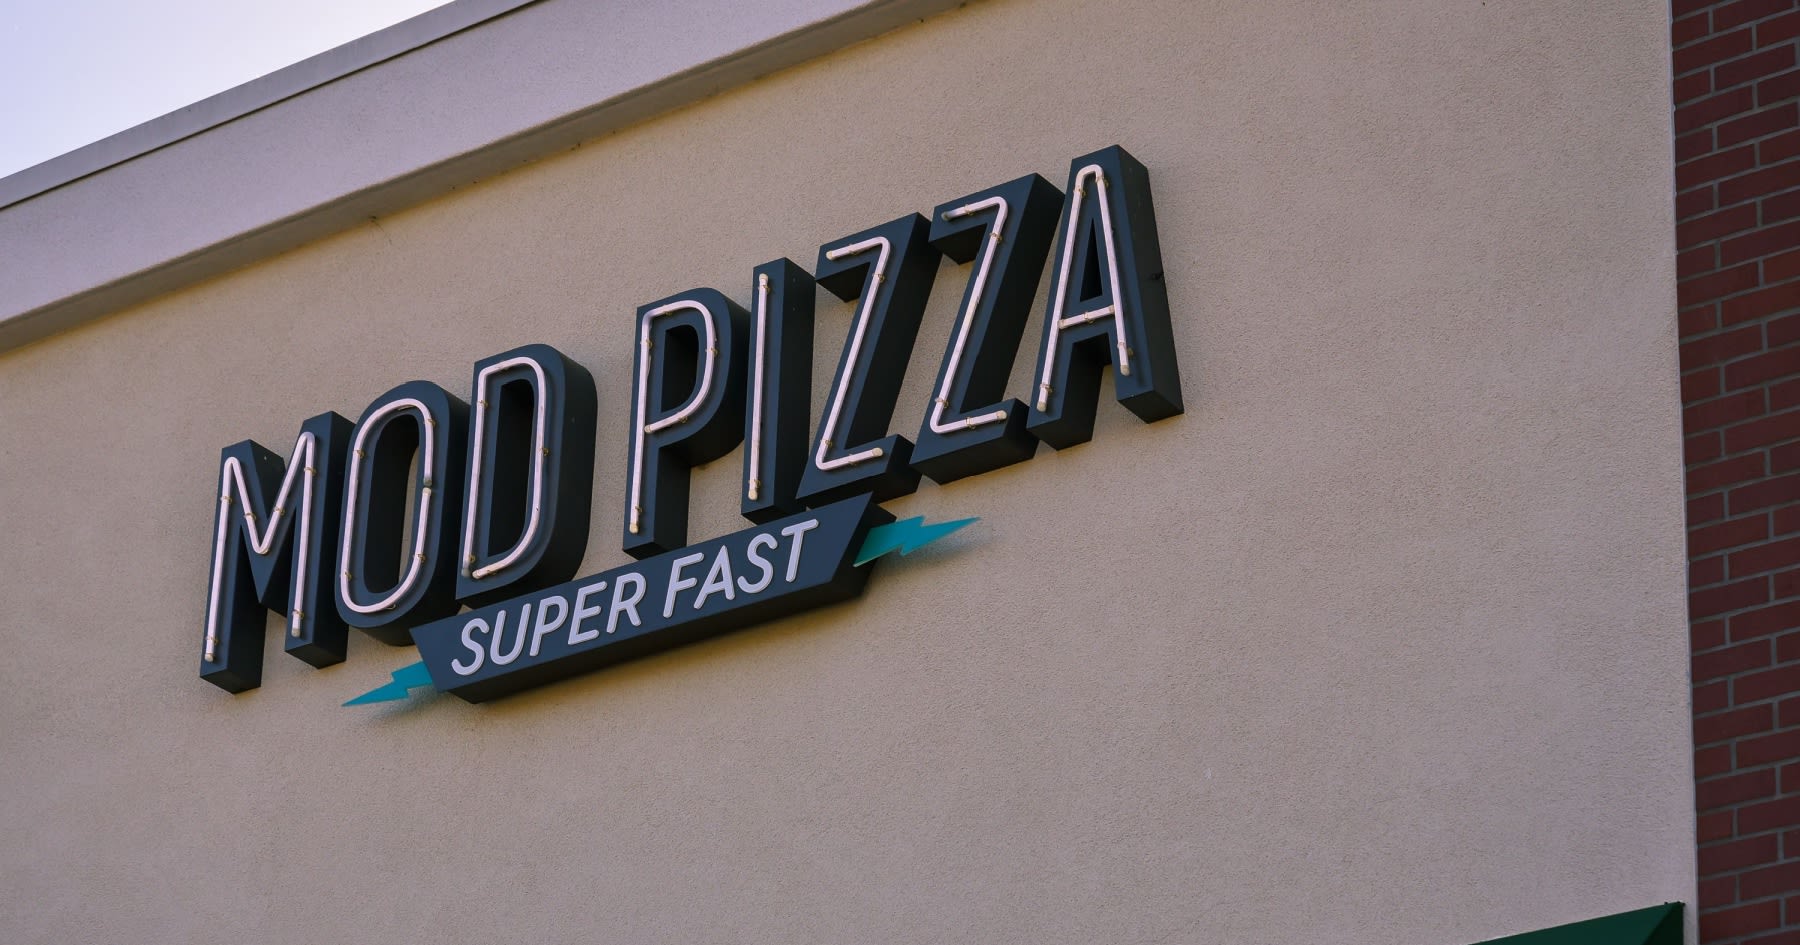 Here's what we know about the new owner of MOD Pizza